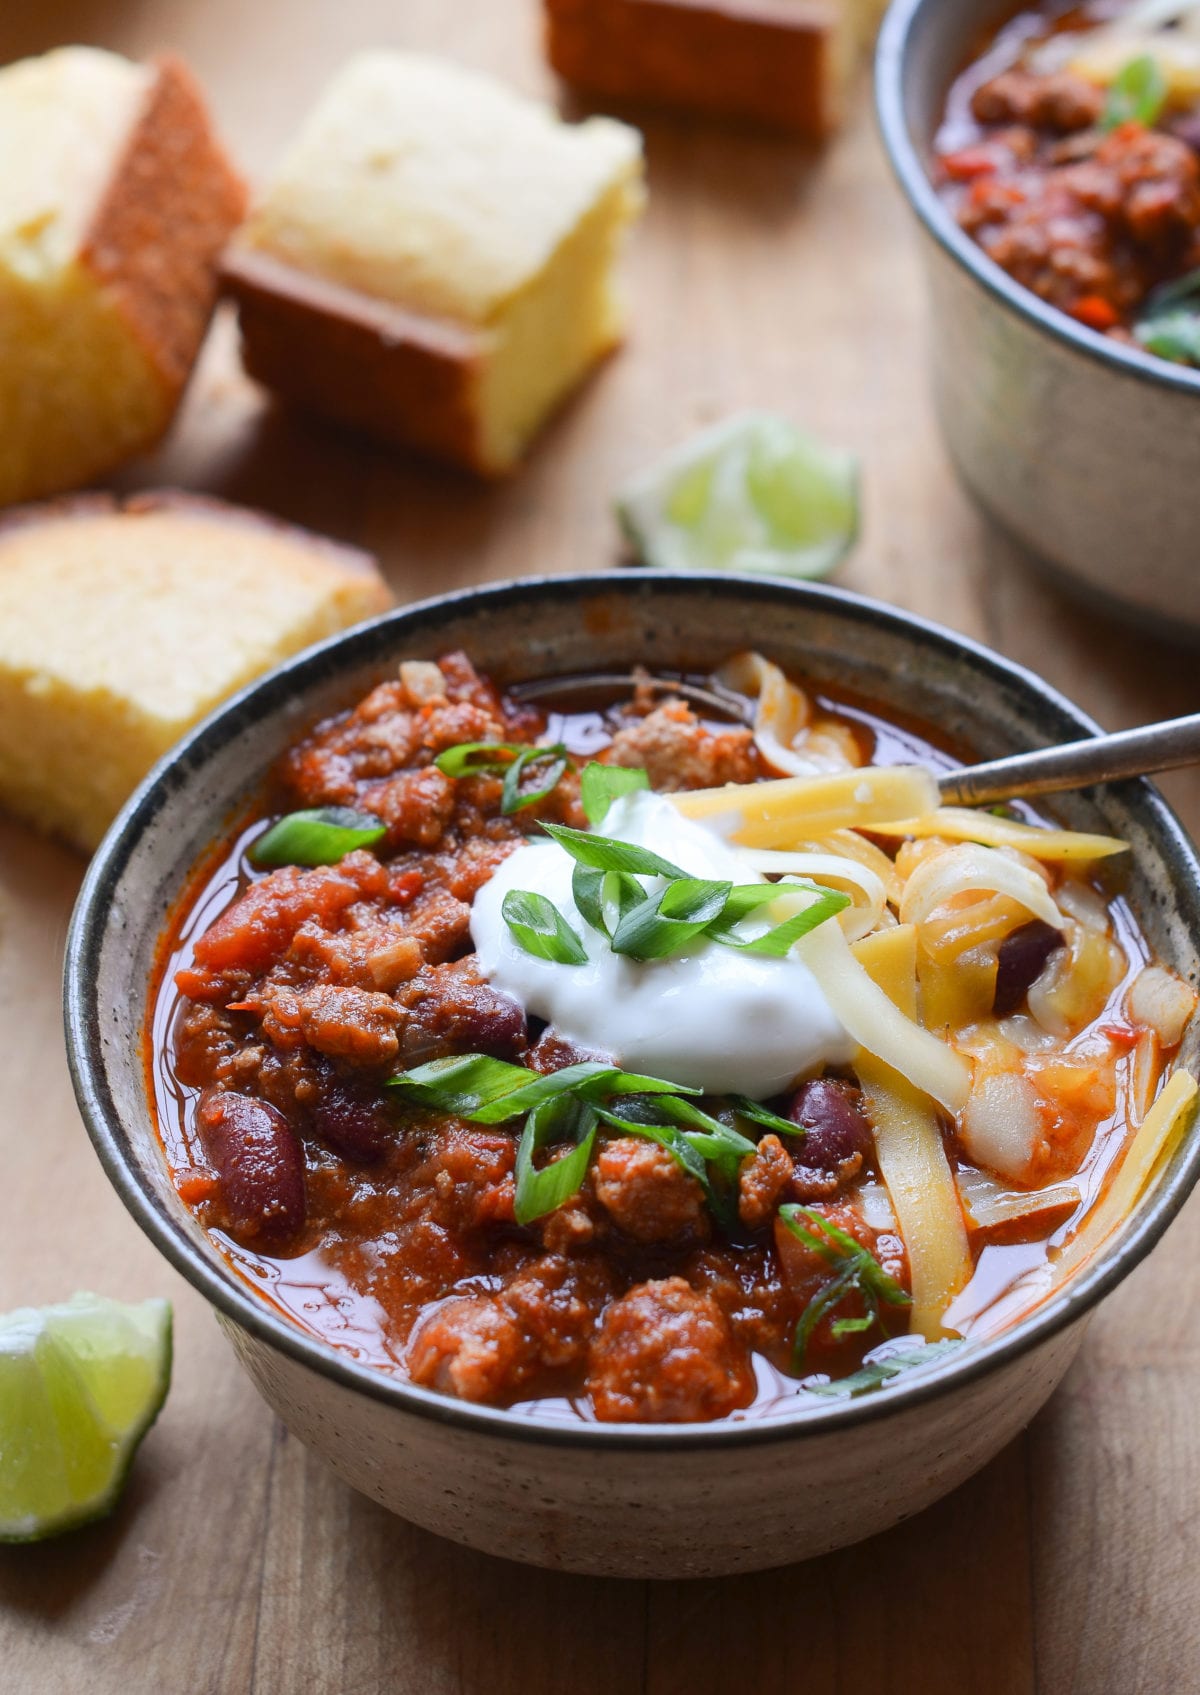 Classic Turkey Chili - Once Upon a Chef